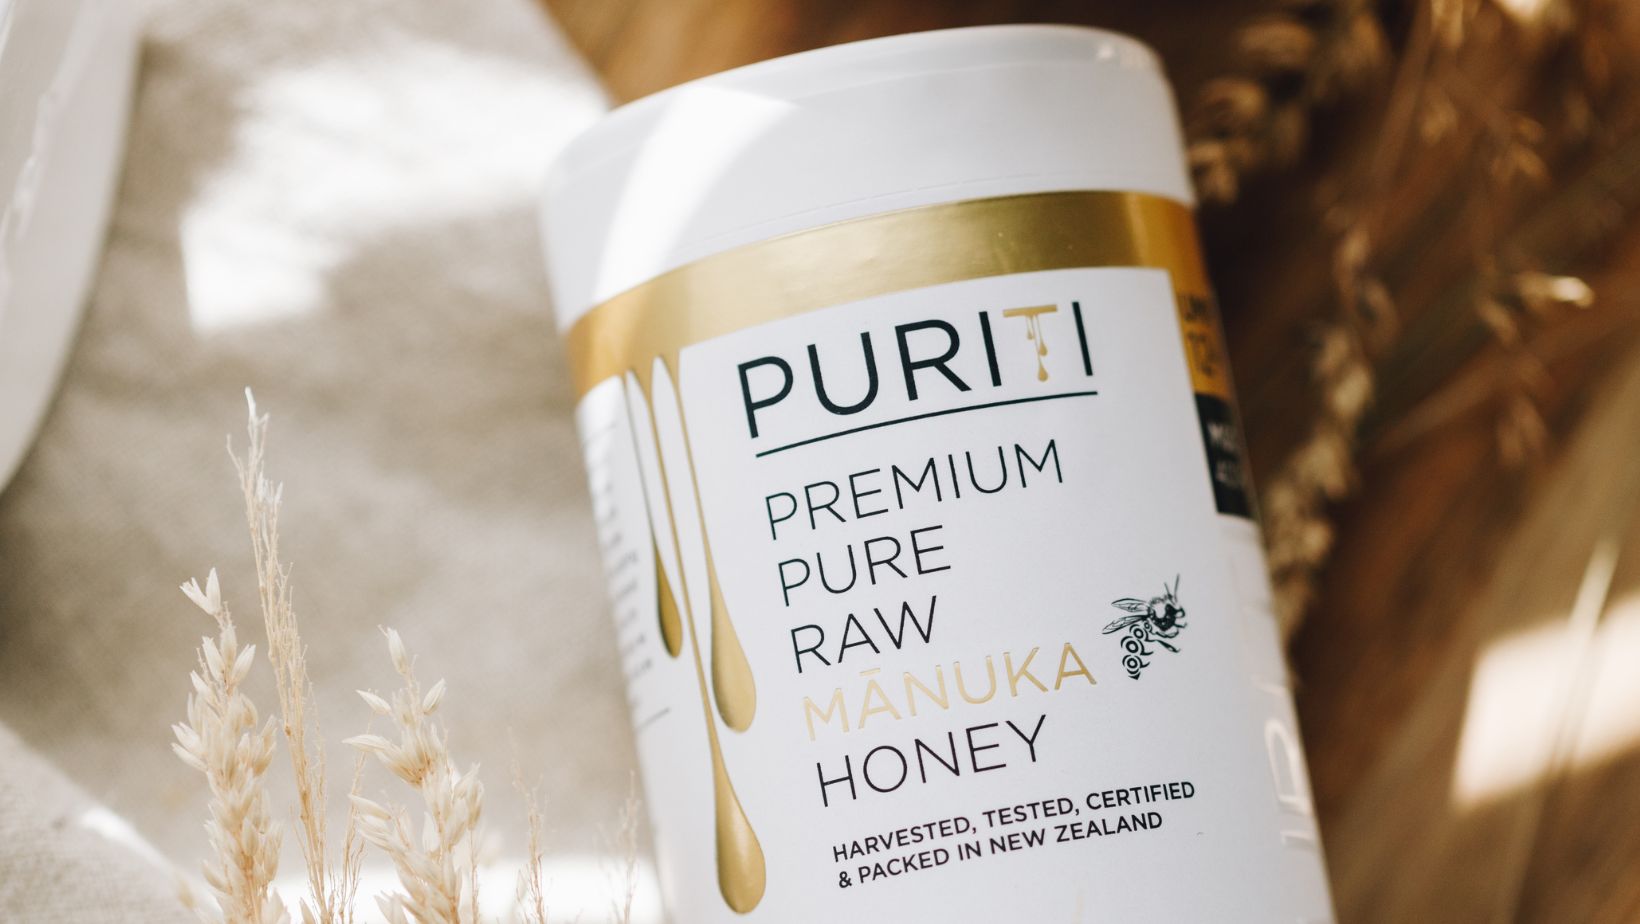 Frequently Asked Questions (FAQs) About Genuine Mānuka Honey - PURITI